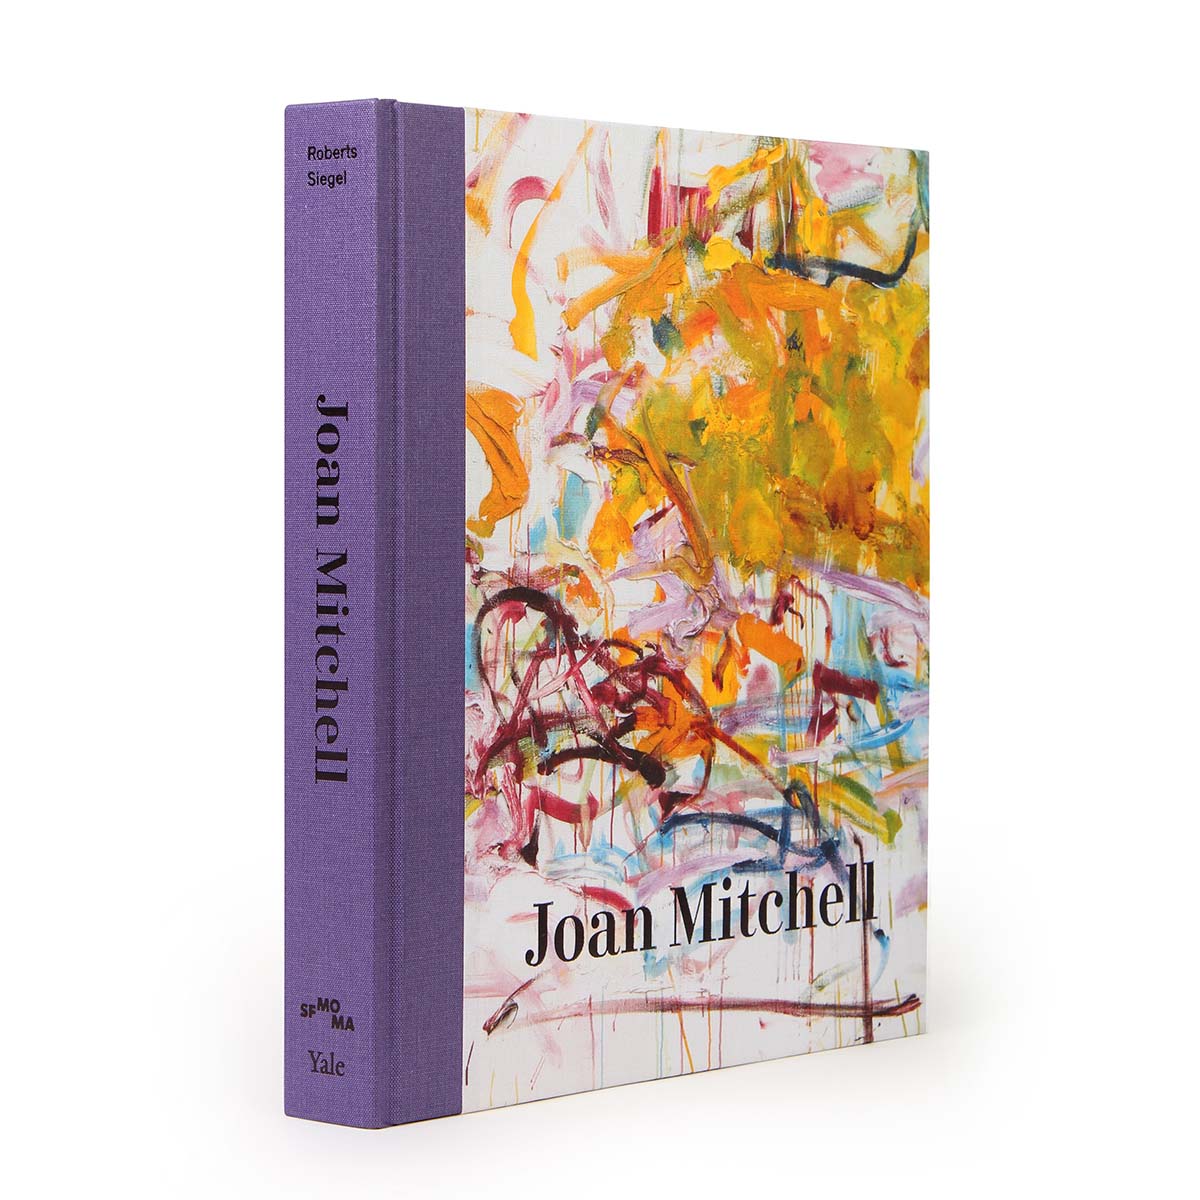 Joan Mitchell's catalogue cover.